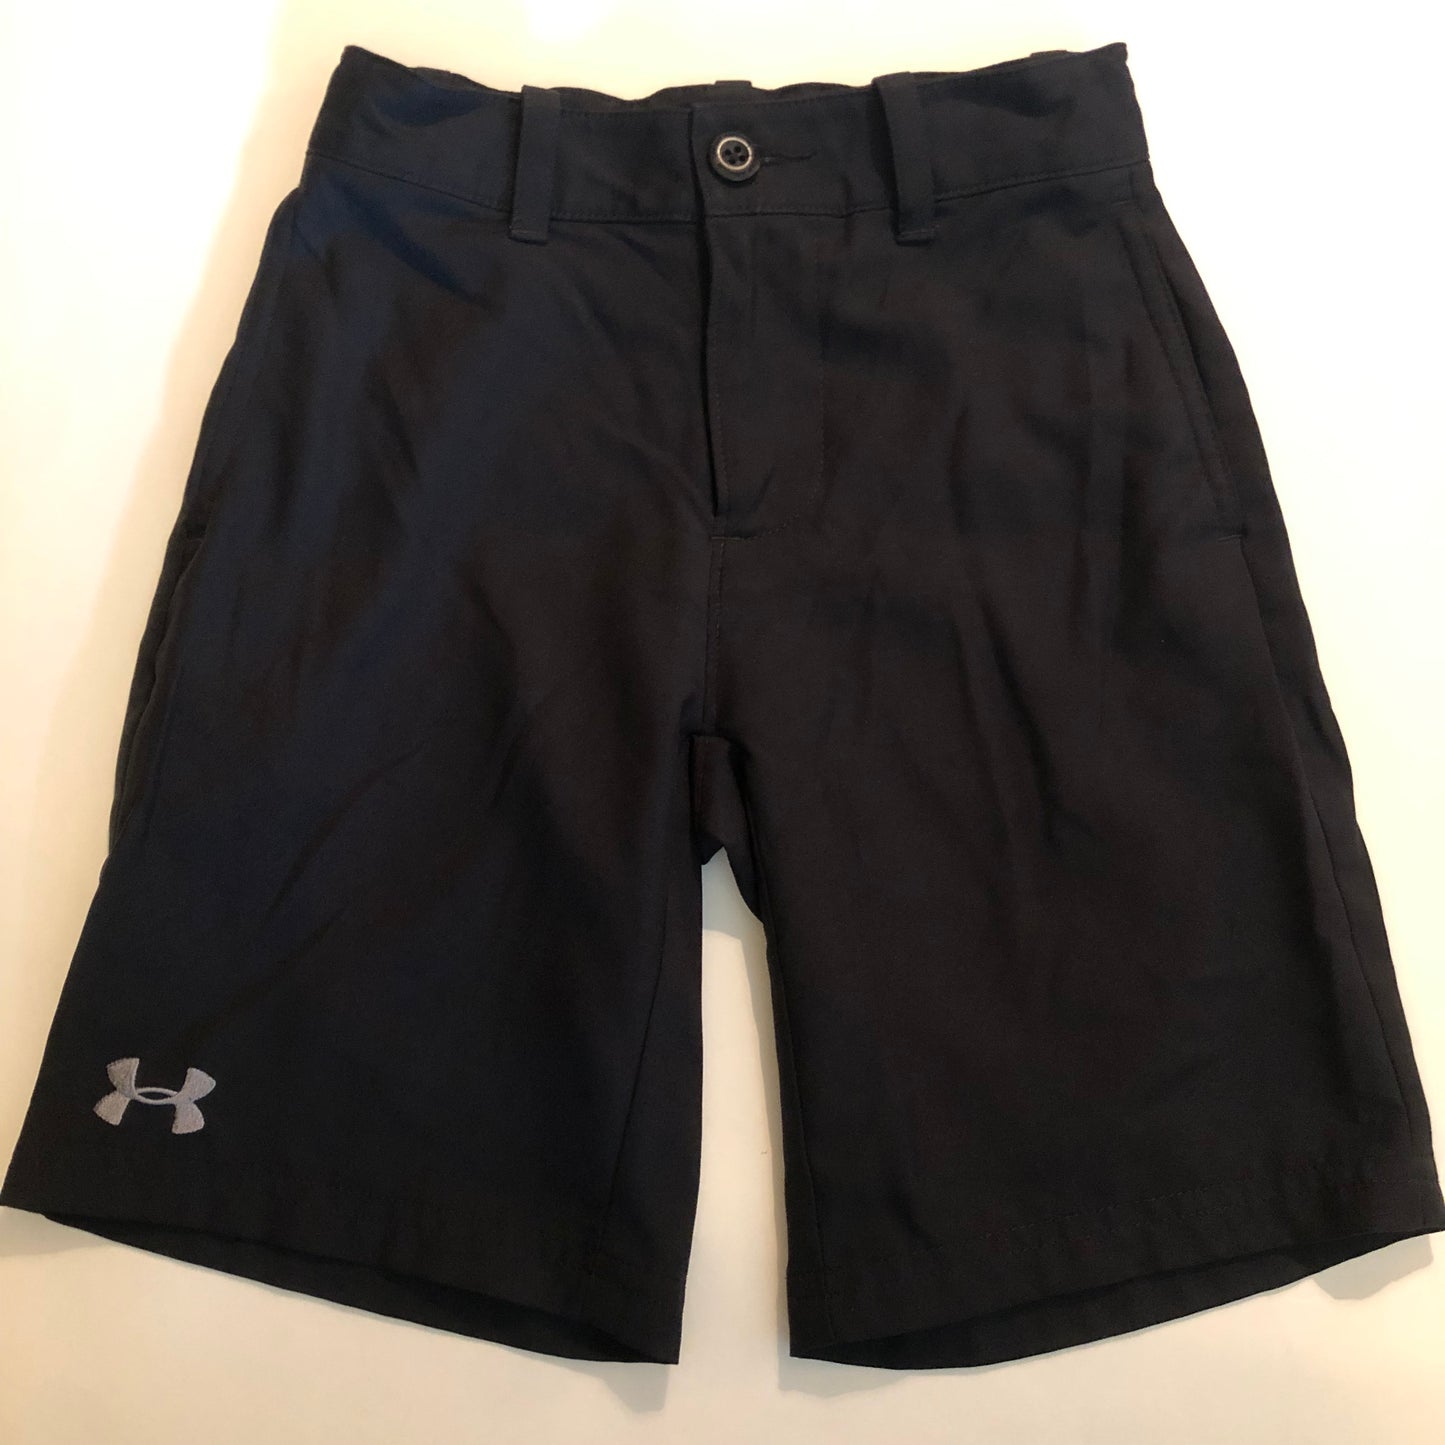 *Reduced* XS Under Armour Golf Shorts- Boy Black, extra small